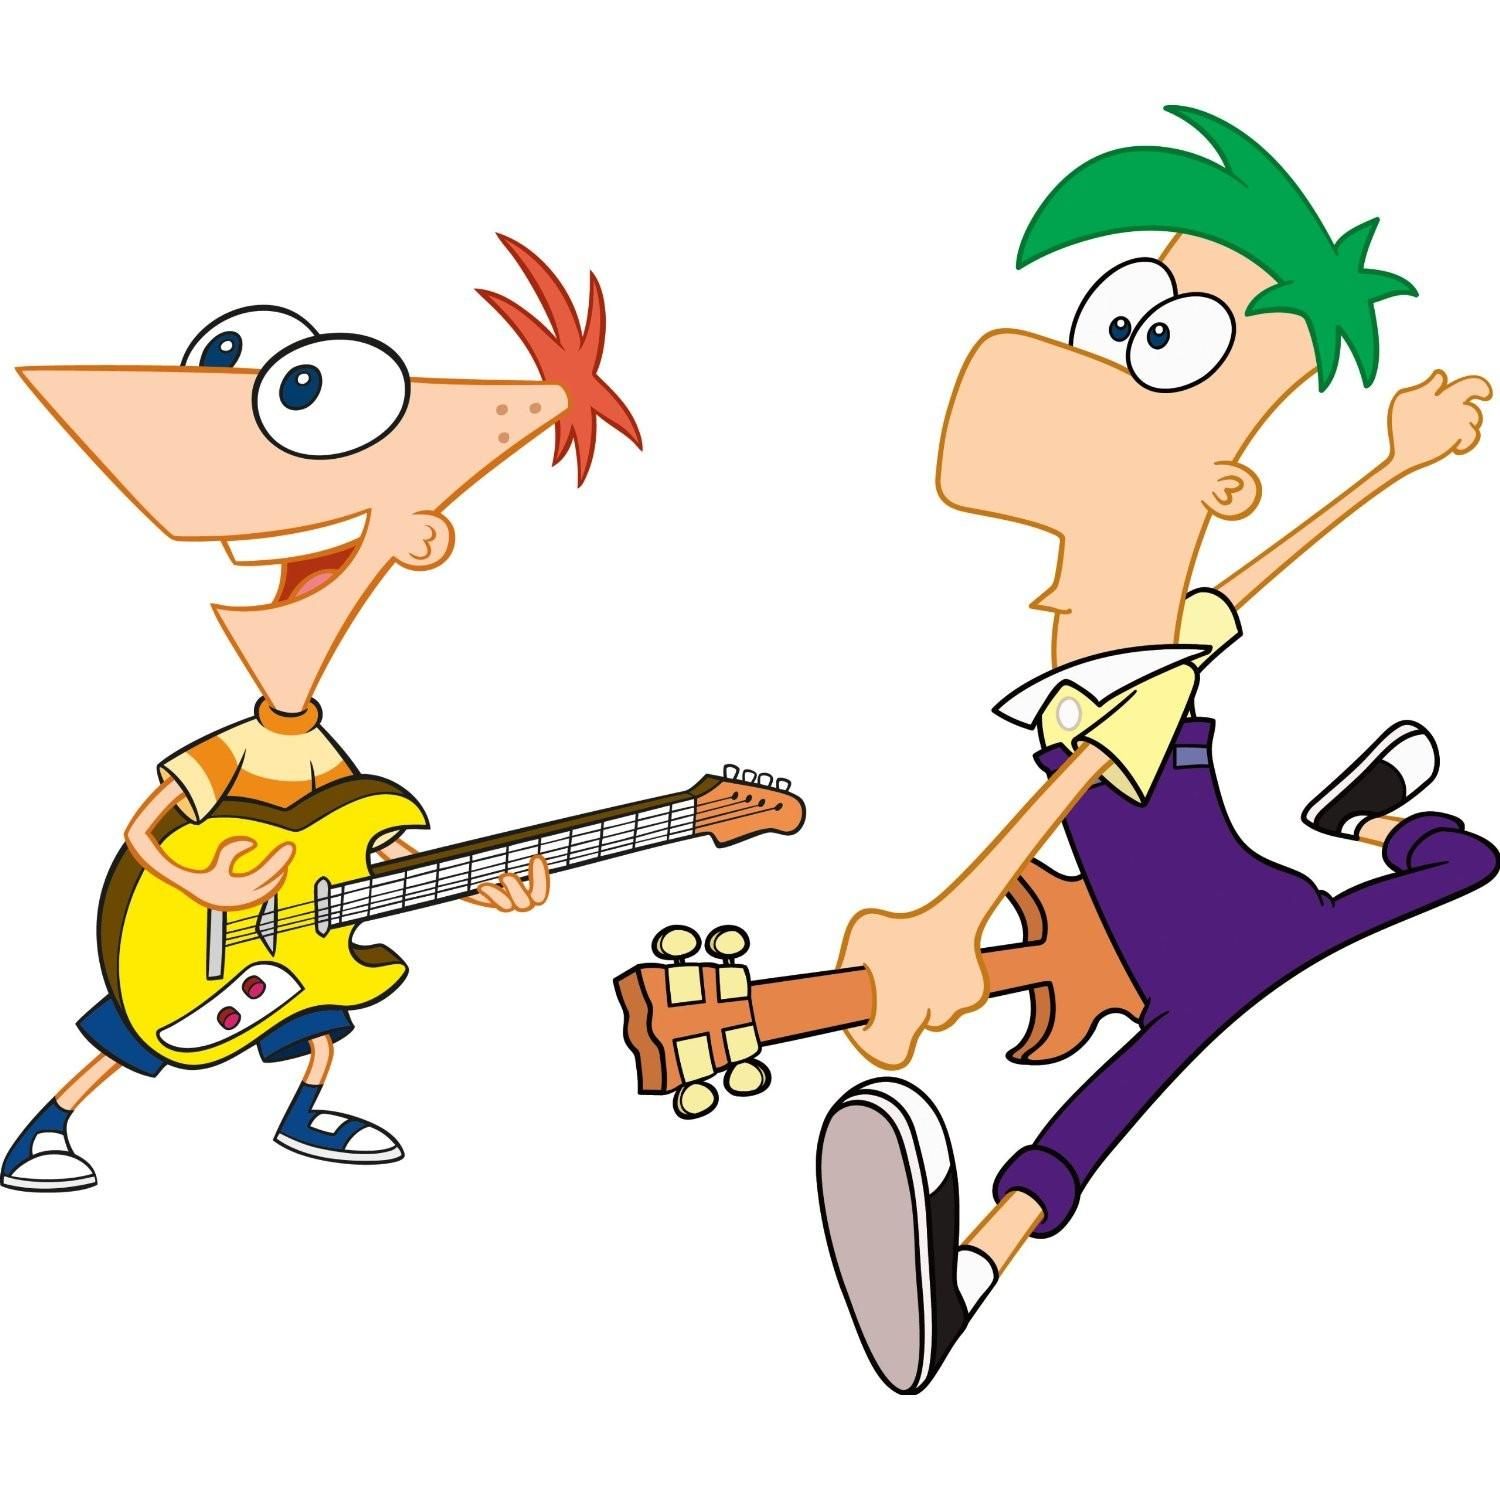 RoomMates Phineas & Ferb Peel & Stick Giant Wall Decal